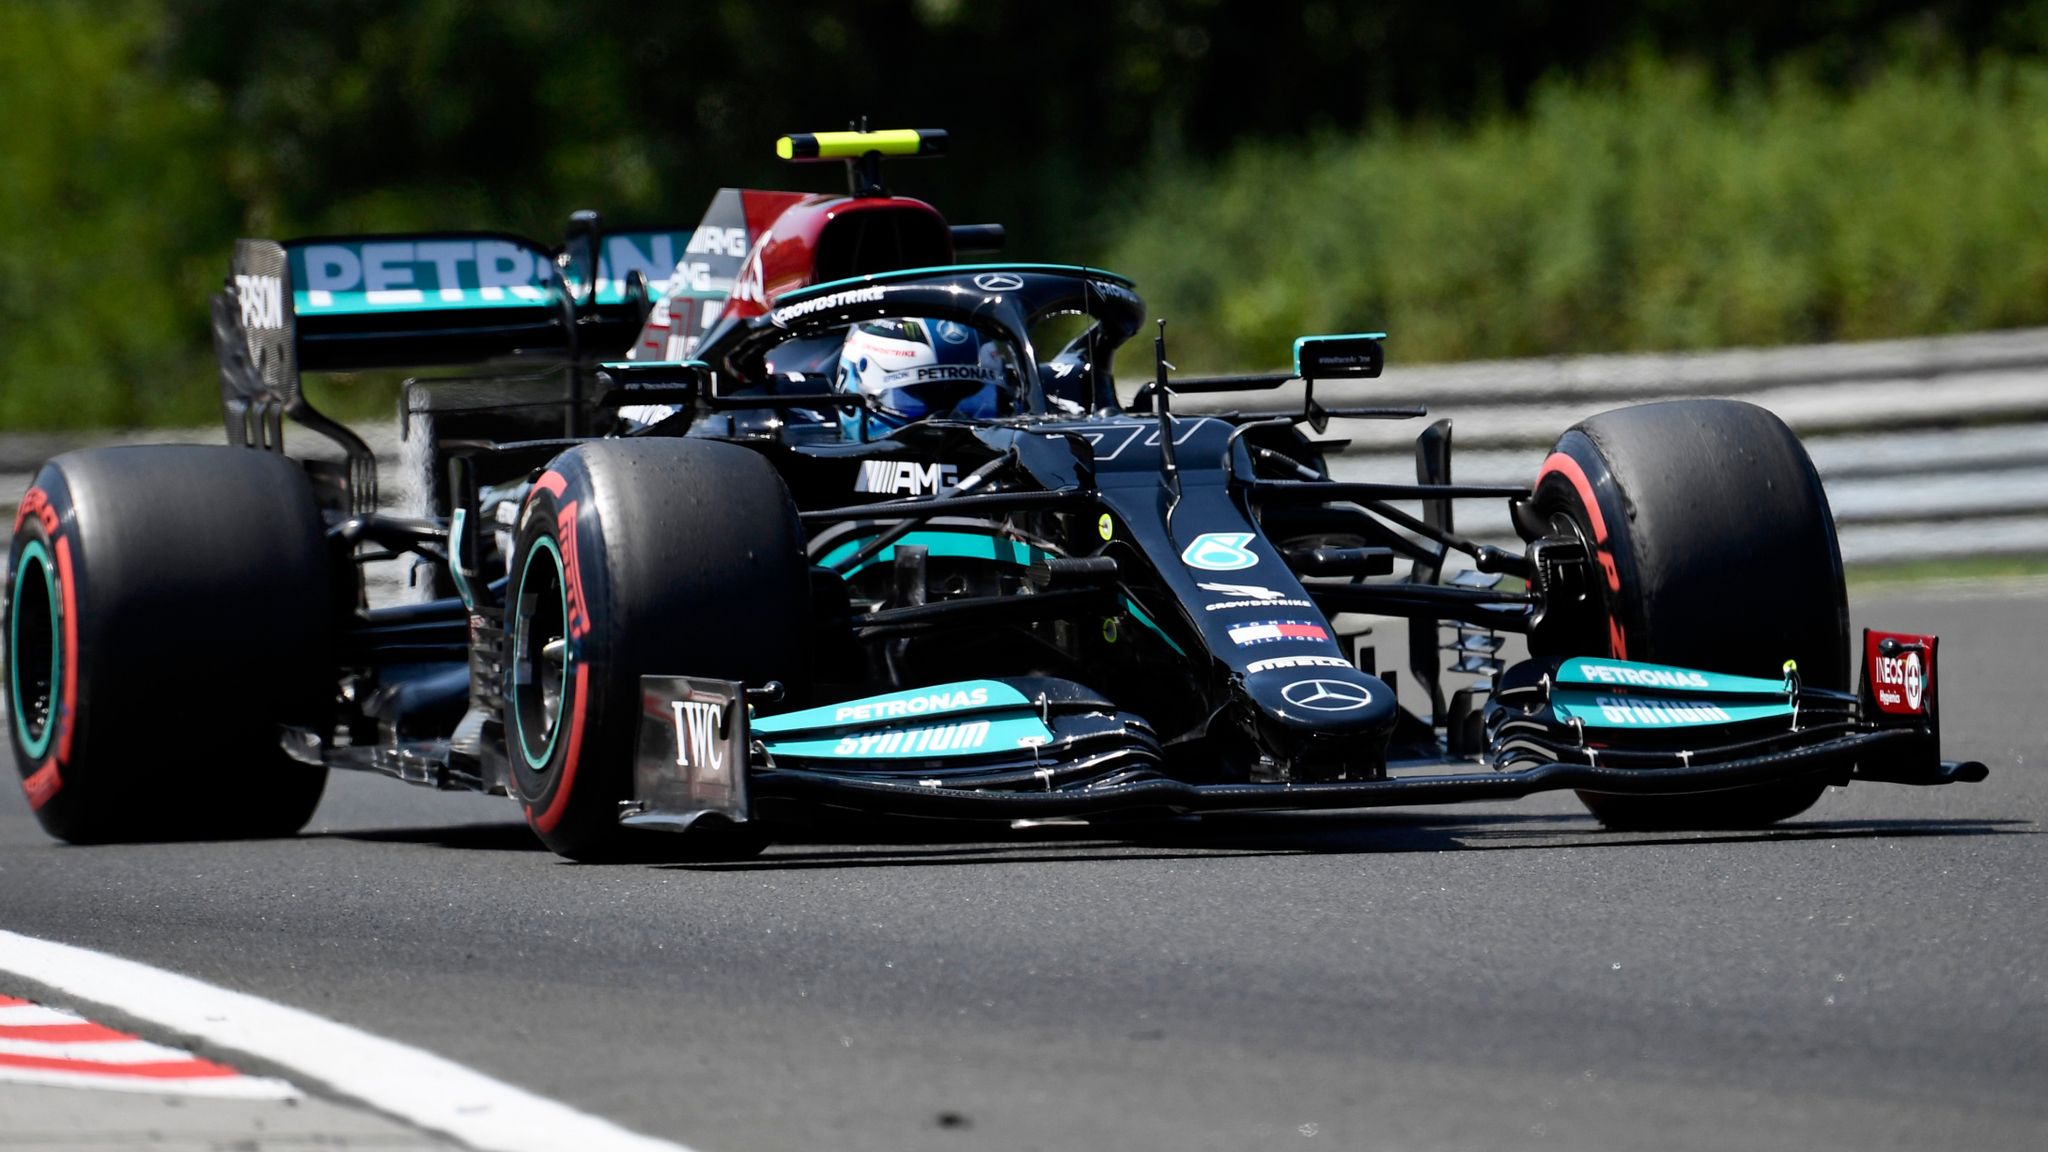 Hungarian GP Valtteri Bottas fastest in Practice Two with Lewis Hamilton second ahead of Max Verstappen F1 News